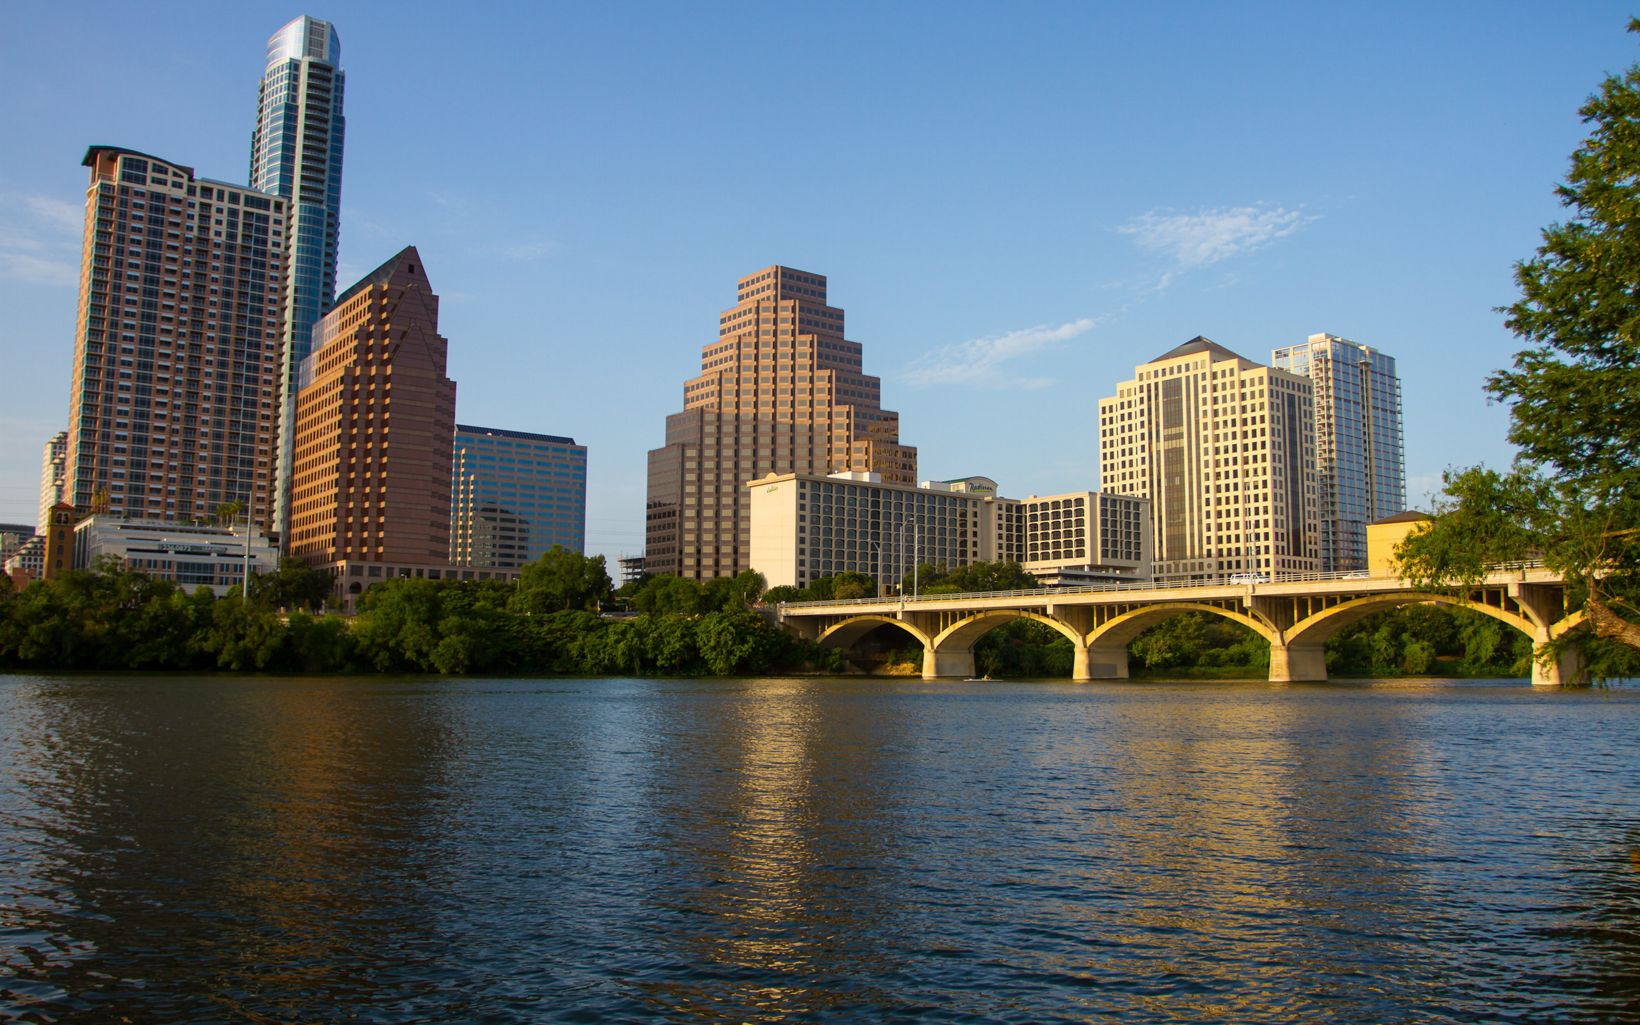 Water access in Texas is regulated by water rights. During dry times, Austin’s water utility lacks enough high-priority rights to meet the city’s water needs. 